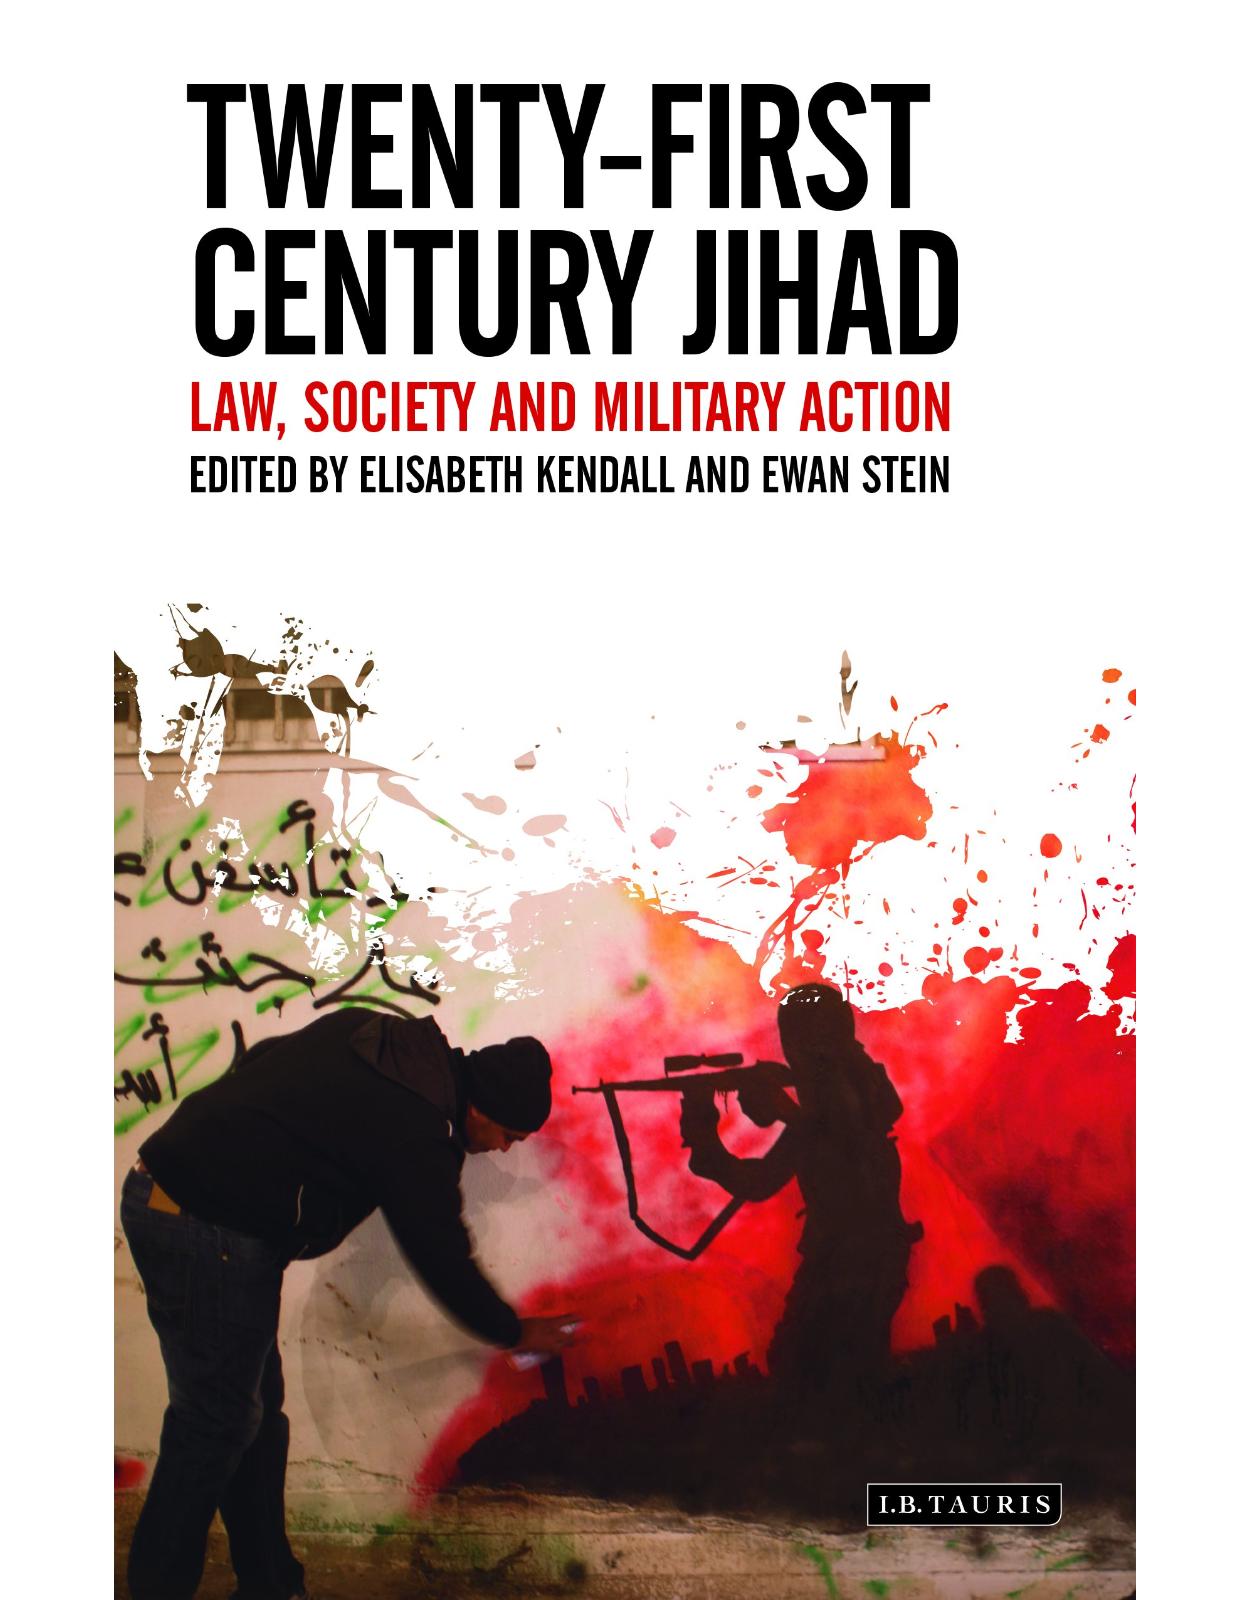 Twenty-First Century Jihad: Law, Society and Military Action